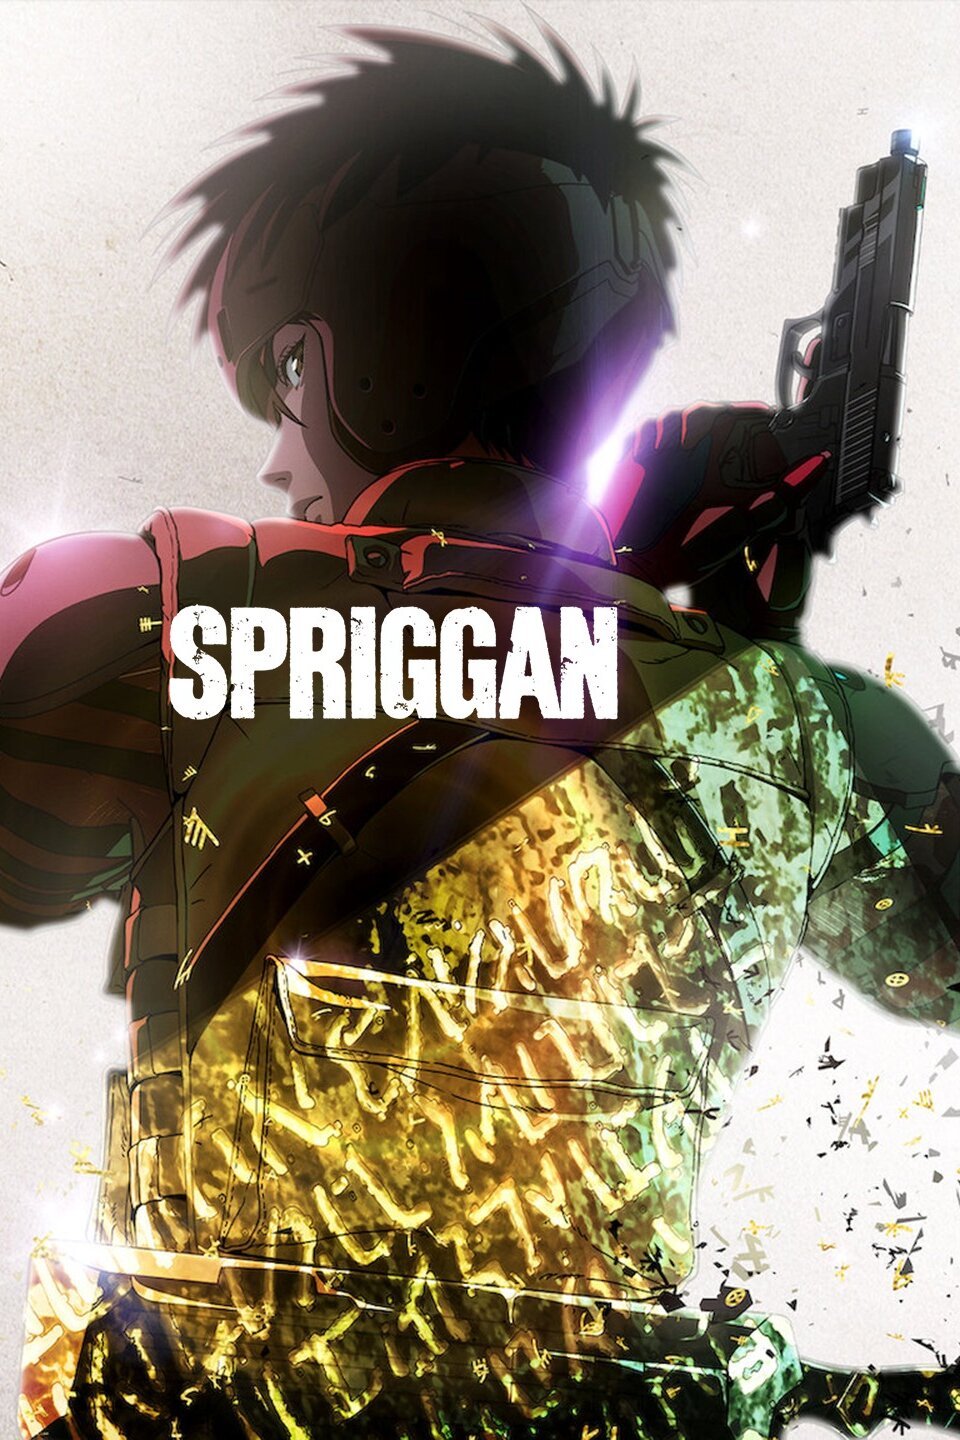 Spriggan Releases New Key Visual  PV Trailer as Series Broadcasts on  Japanese TV